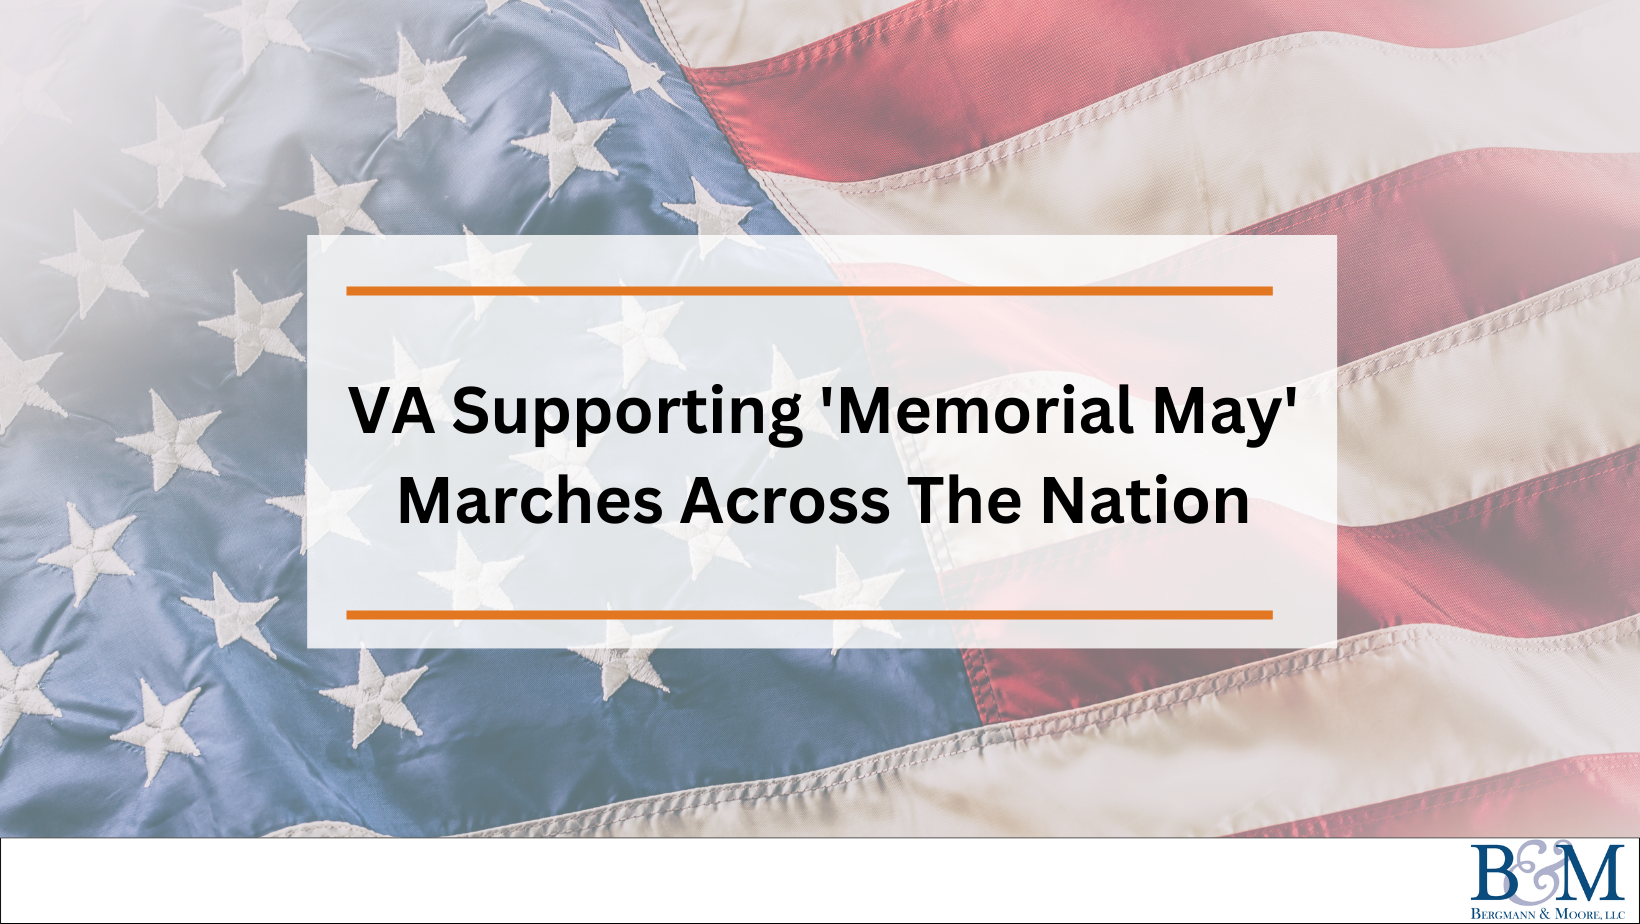 VA Supporting 'Memorial May' Marches Across The Nation